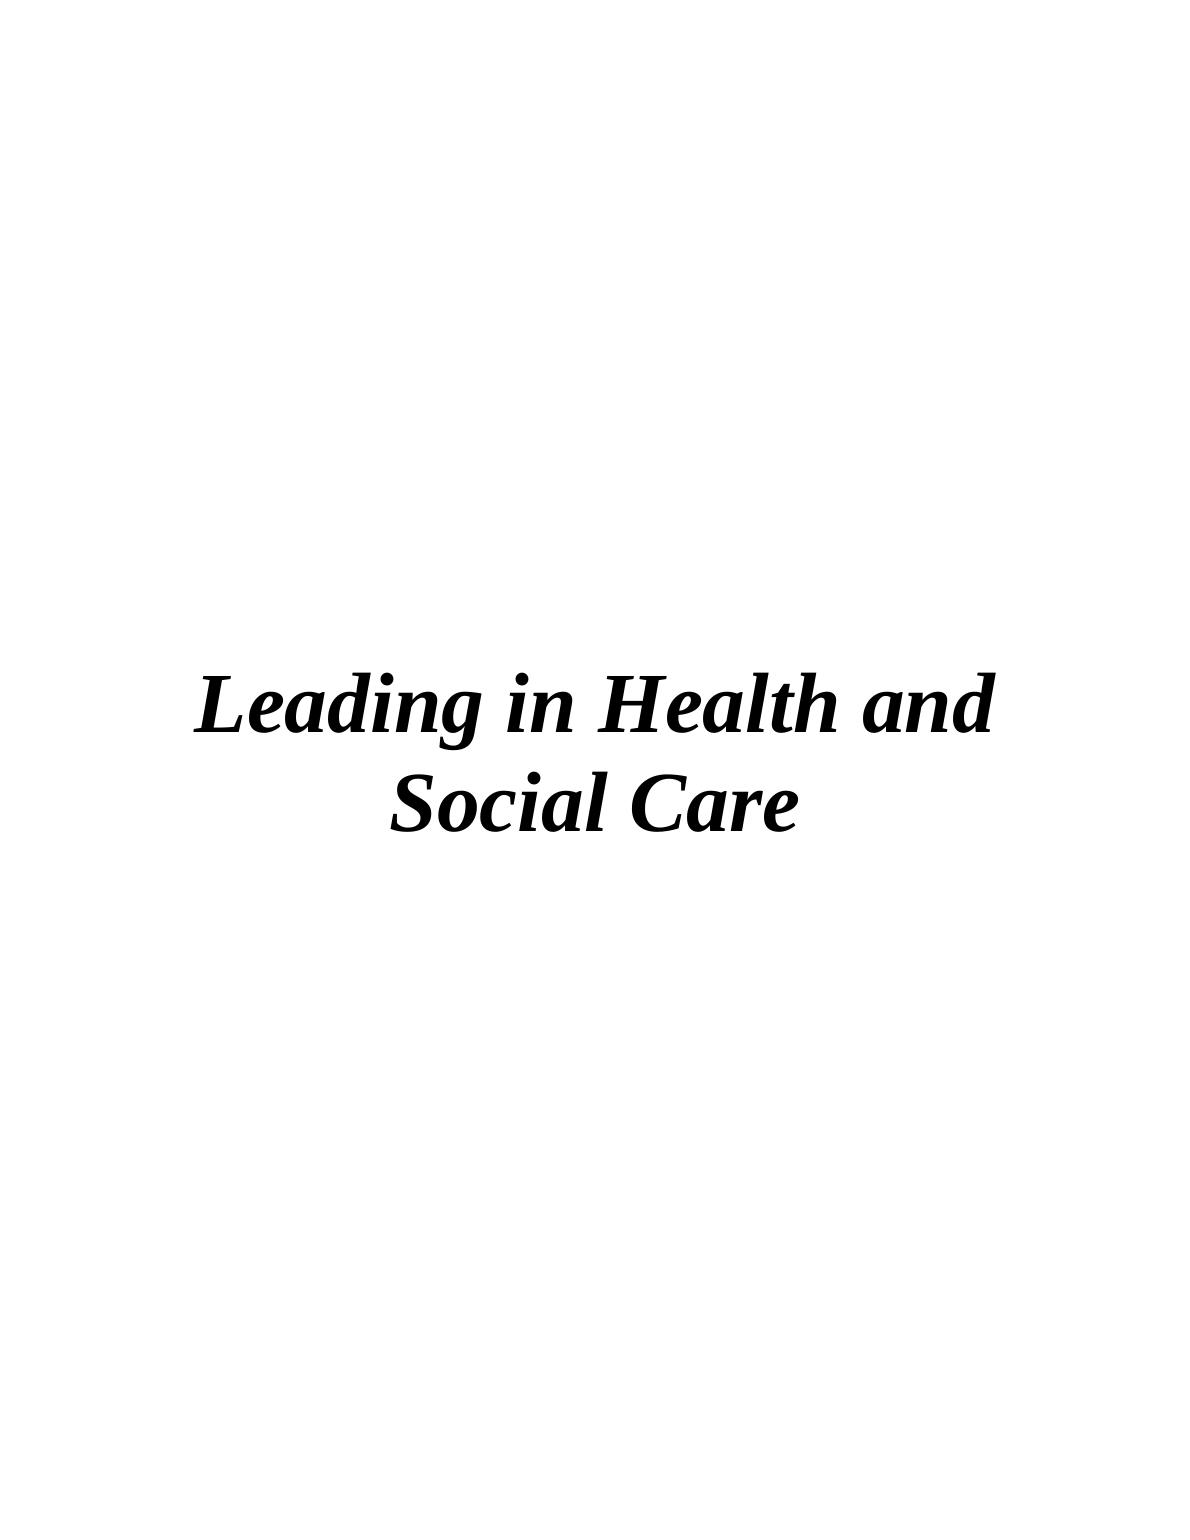 Leading in Health and Social Care Assignment_1